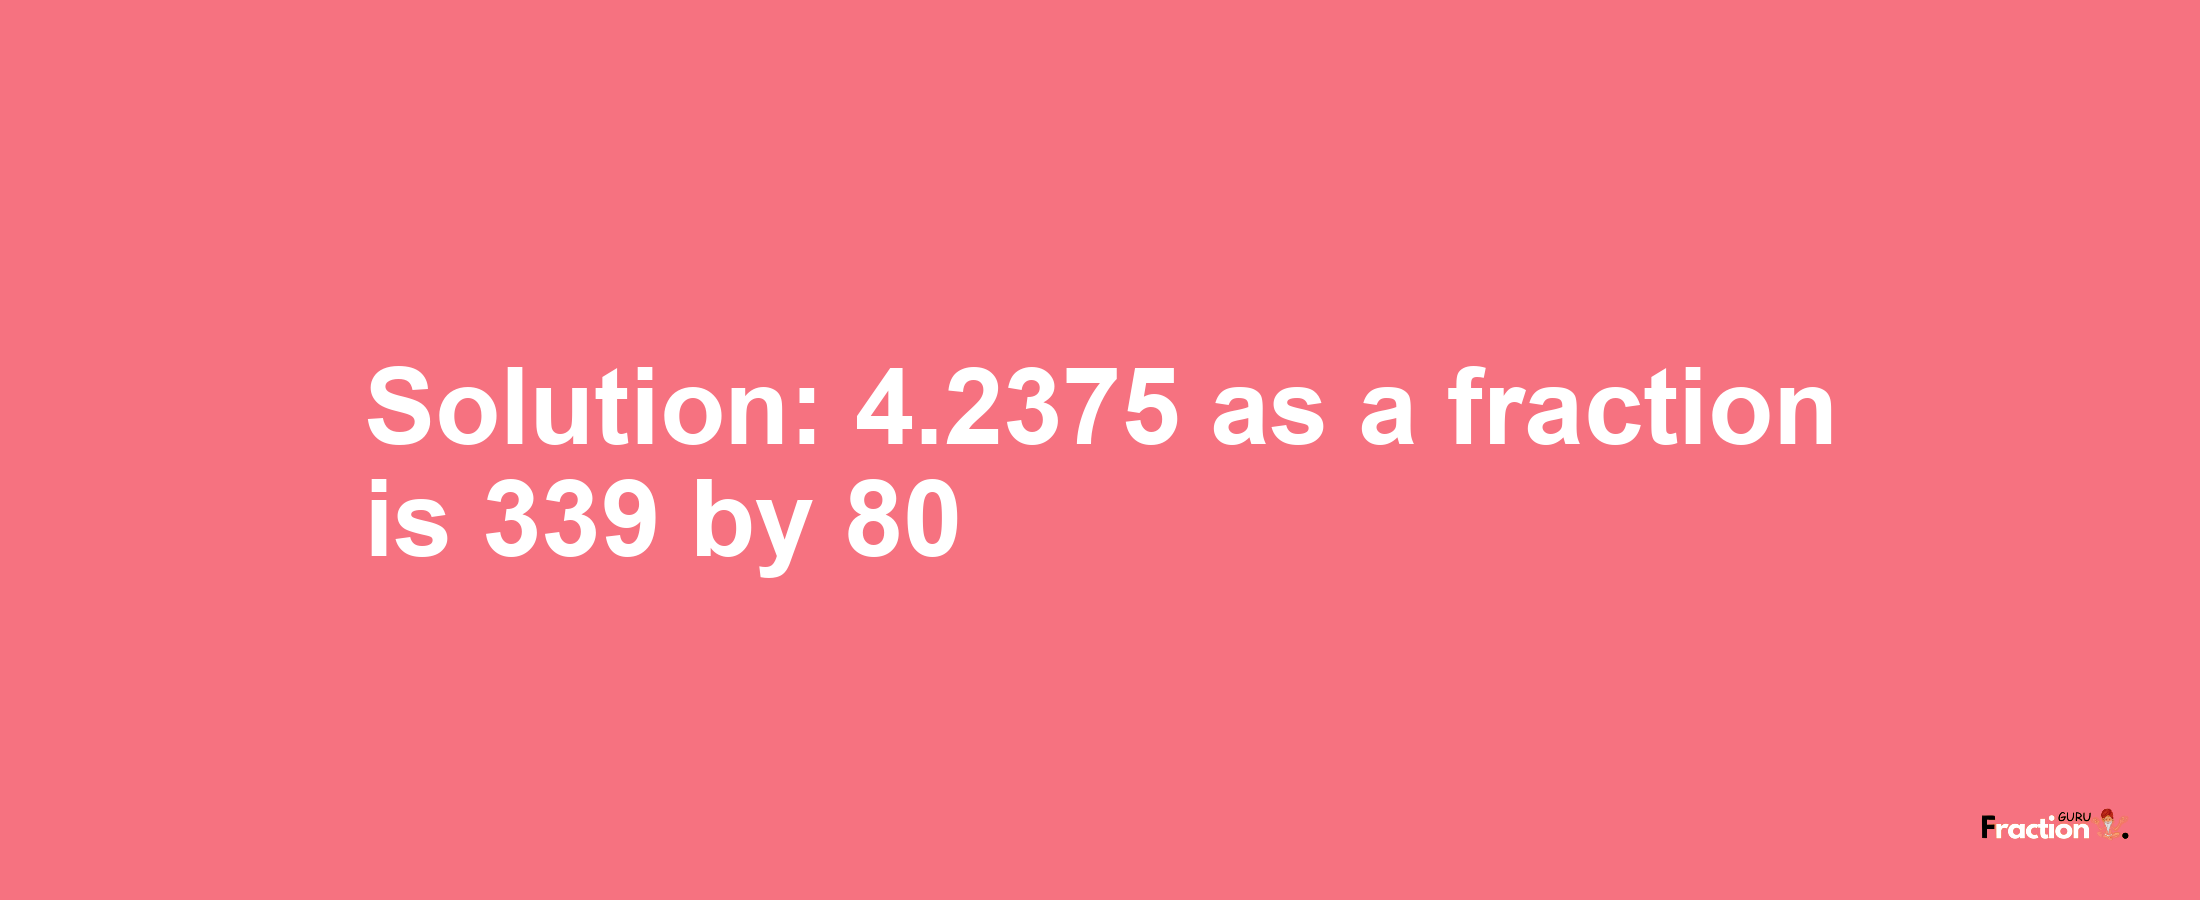 Solution:4.2375 as a fraction is 339/80